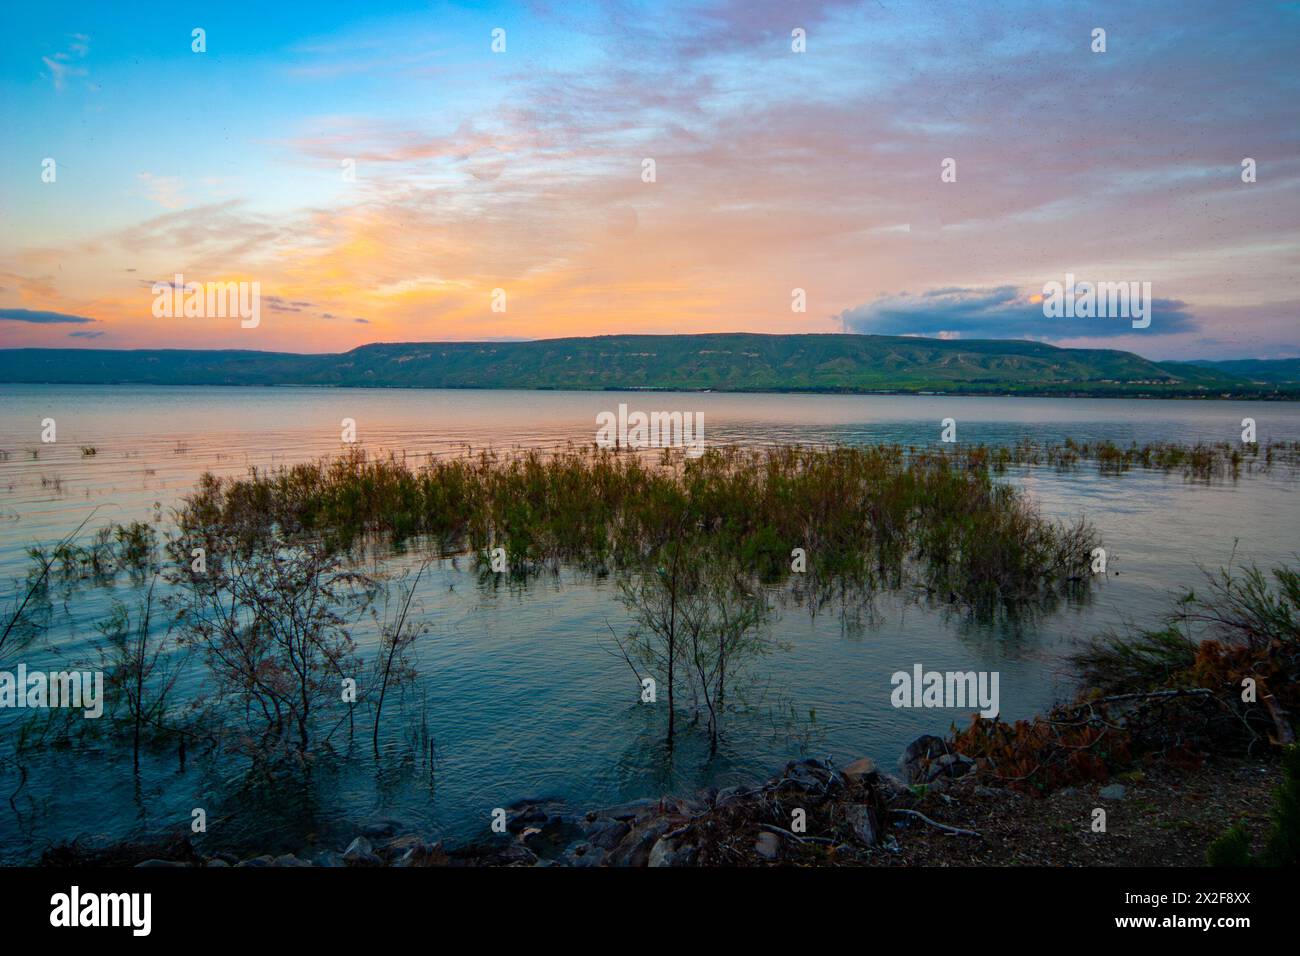 At water's edge on the shore of the Sea of Galilee, [Lake Kineret or Lake Tiberias] Israel at sunset Stock Photo